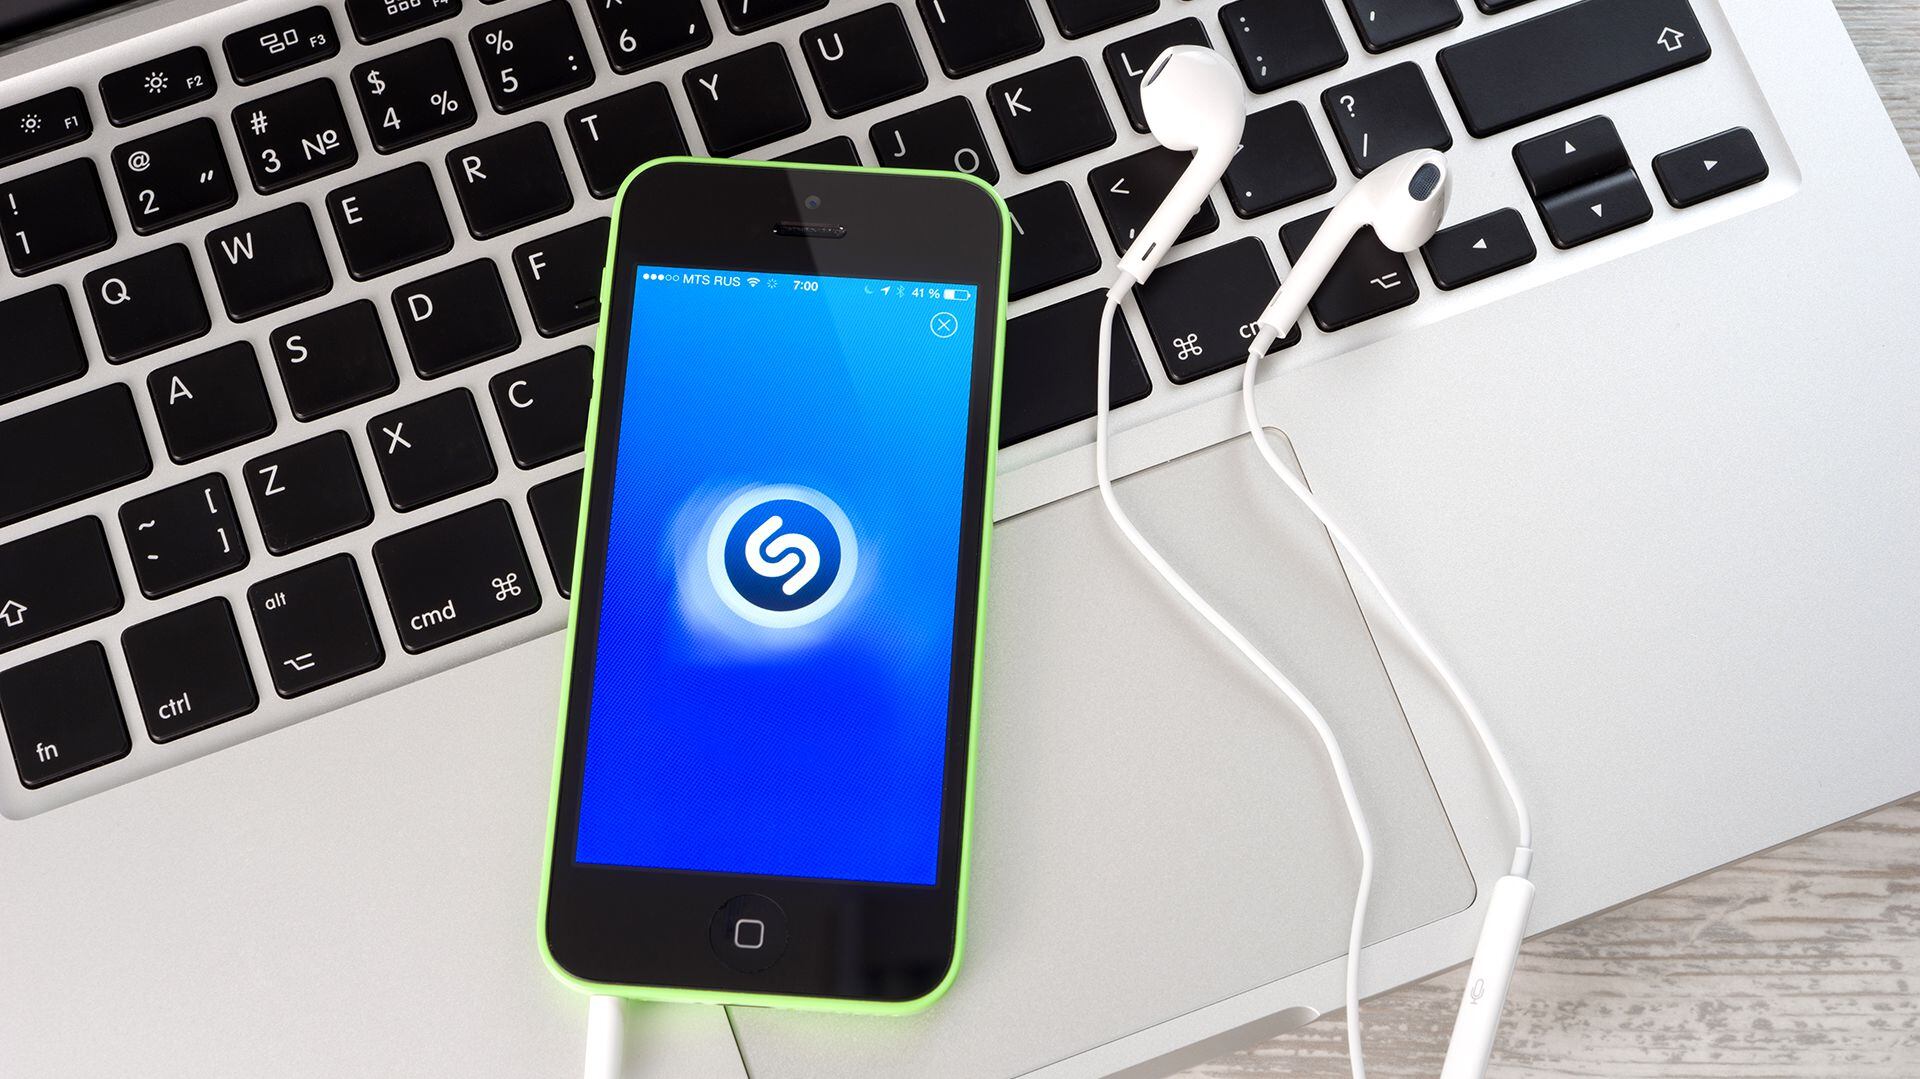 shazam-introduces-new-feature-to-identify-music-in-apps-while-wearing-headphones